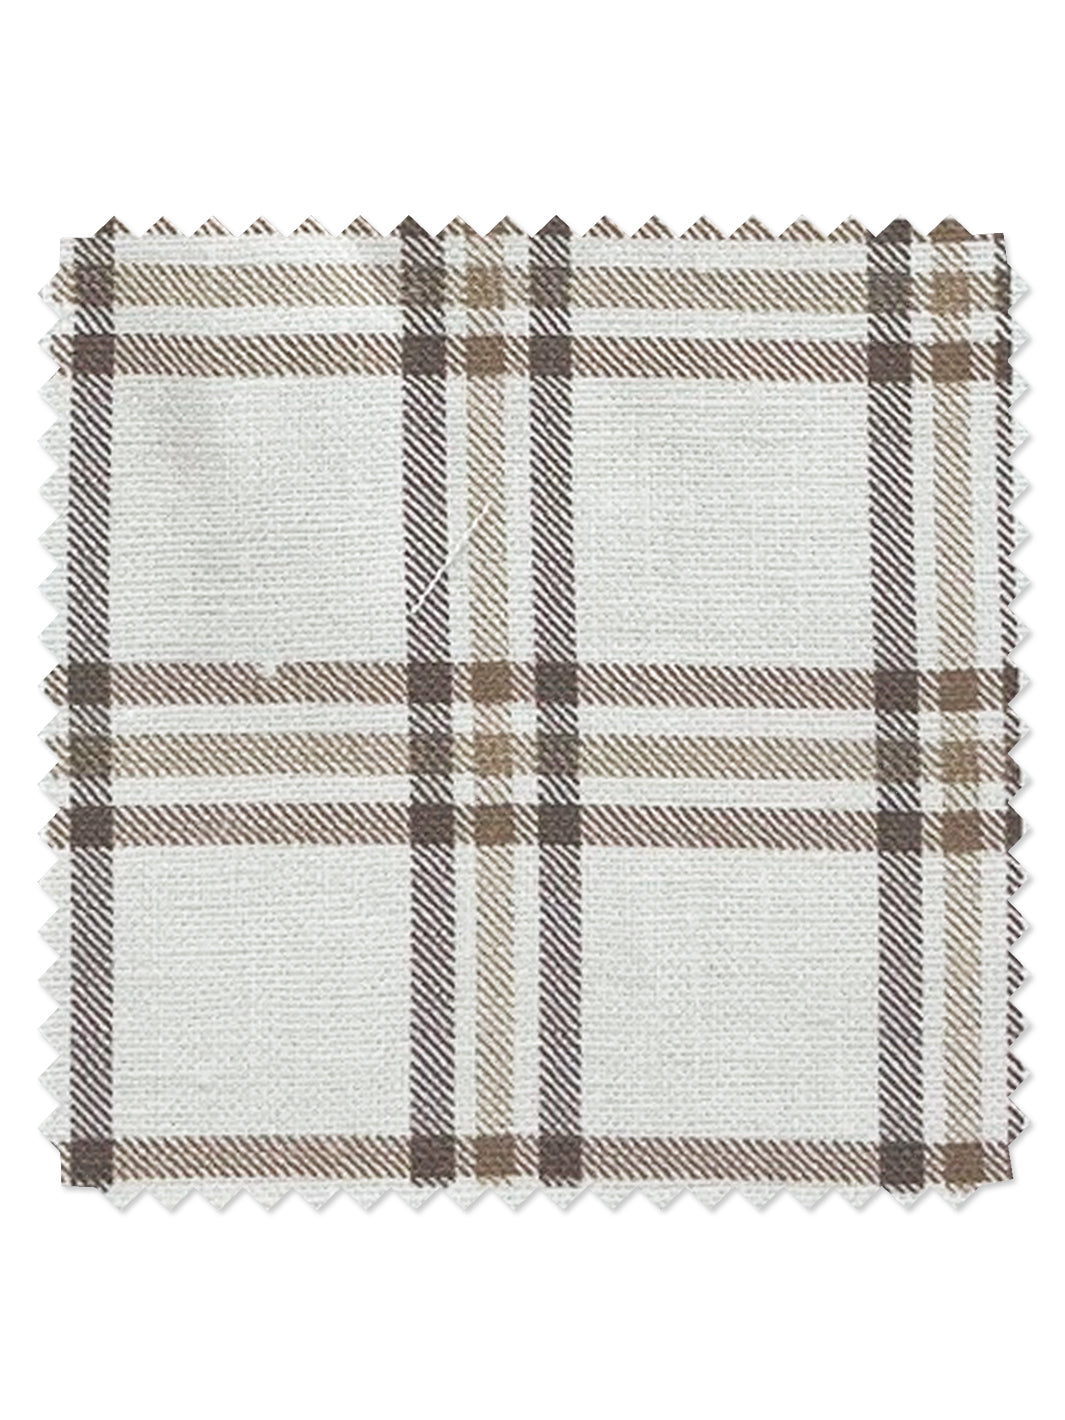 'Rogers Plaid' Linen Fabric by Nathan Turner - Brown